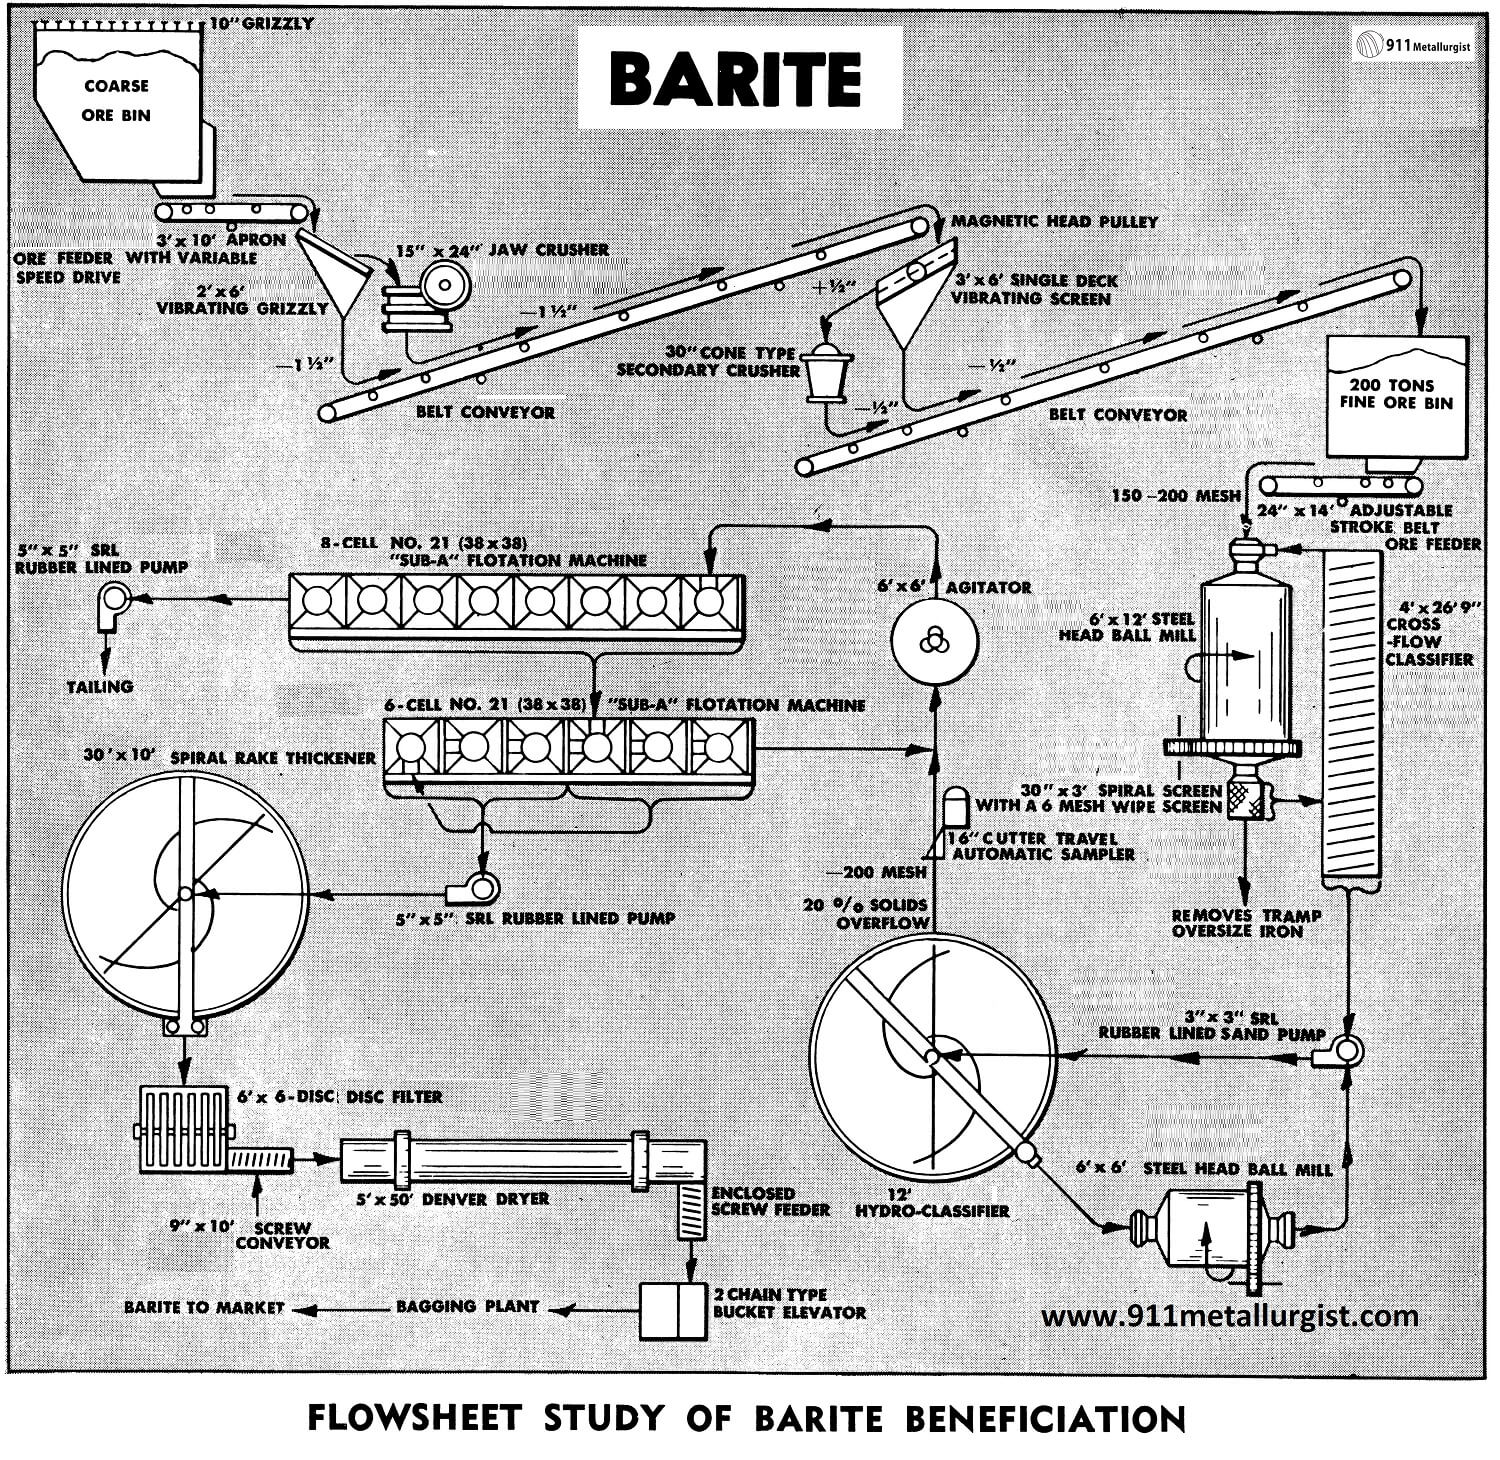 Barite Beneficiation Process and Plant Flowsheet